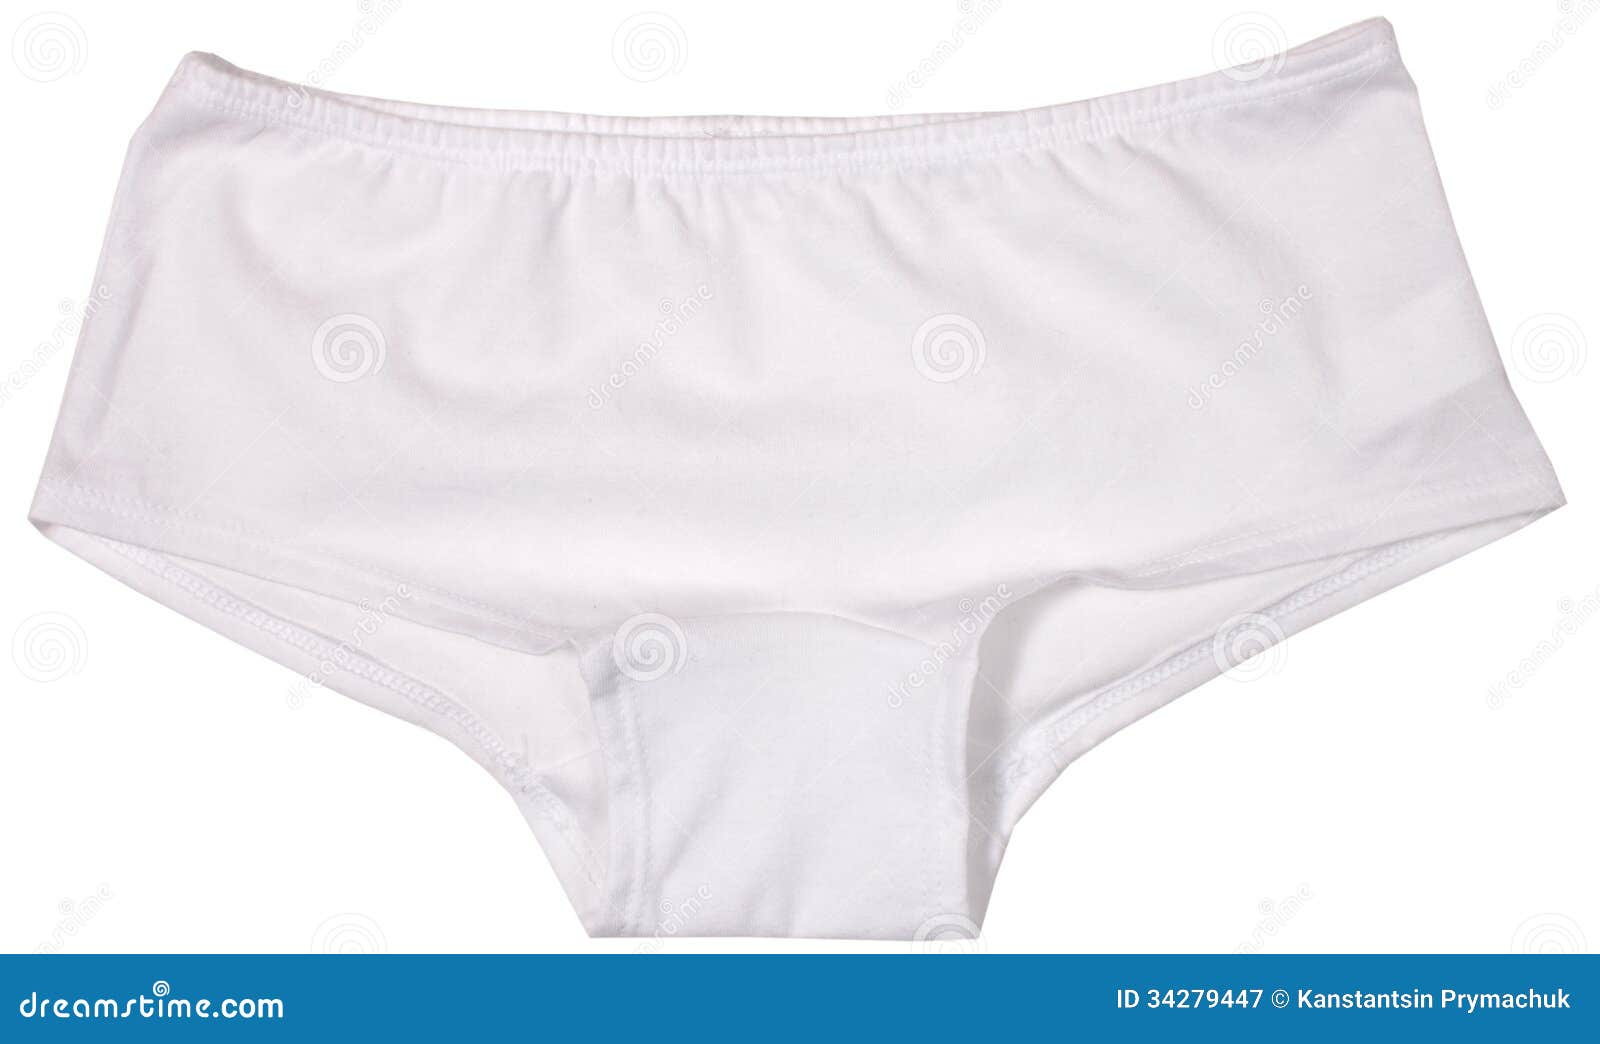 Women S Panties Isolated on White Stock Image - Image of object ...